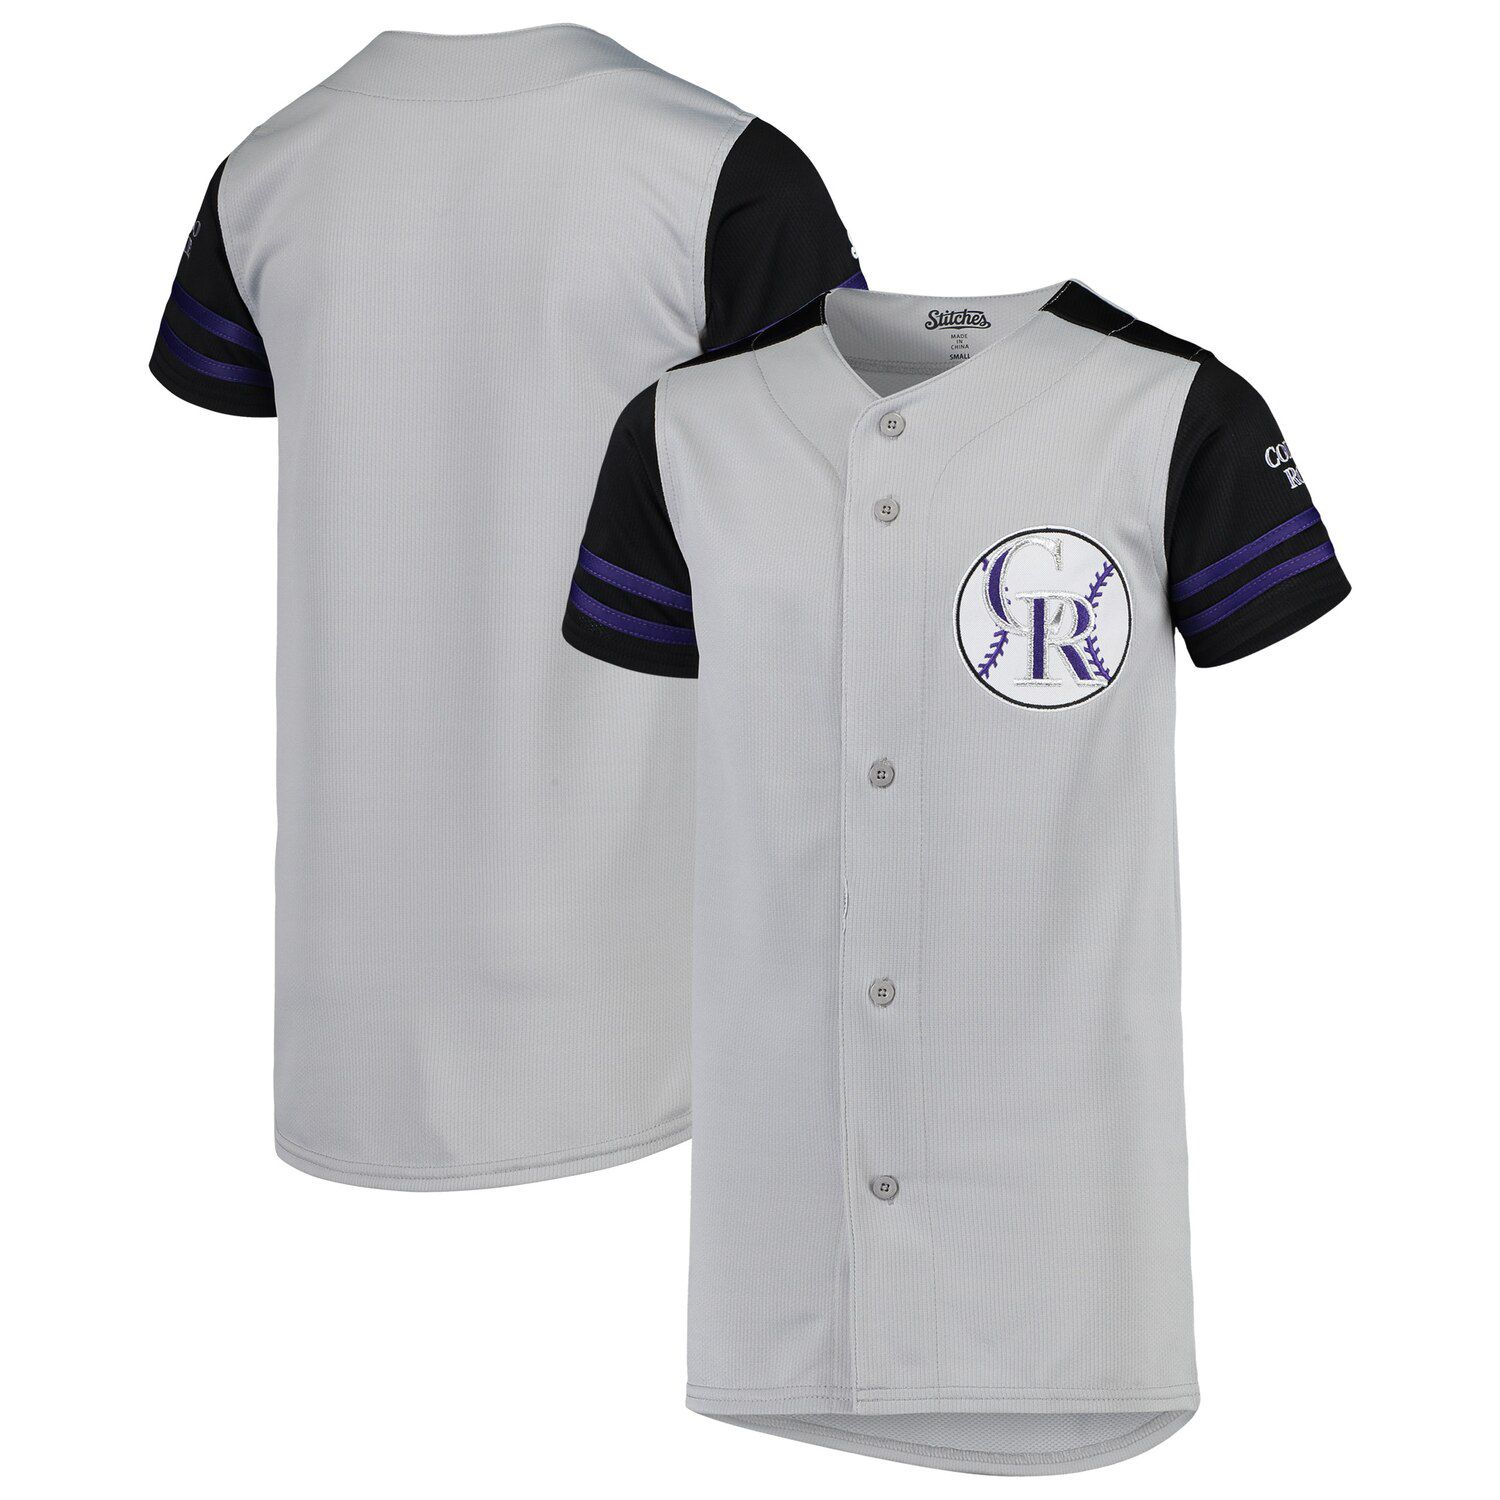 youth rockies jersey